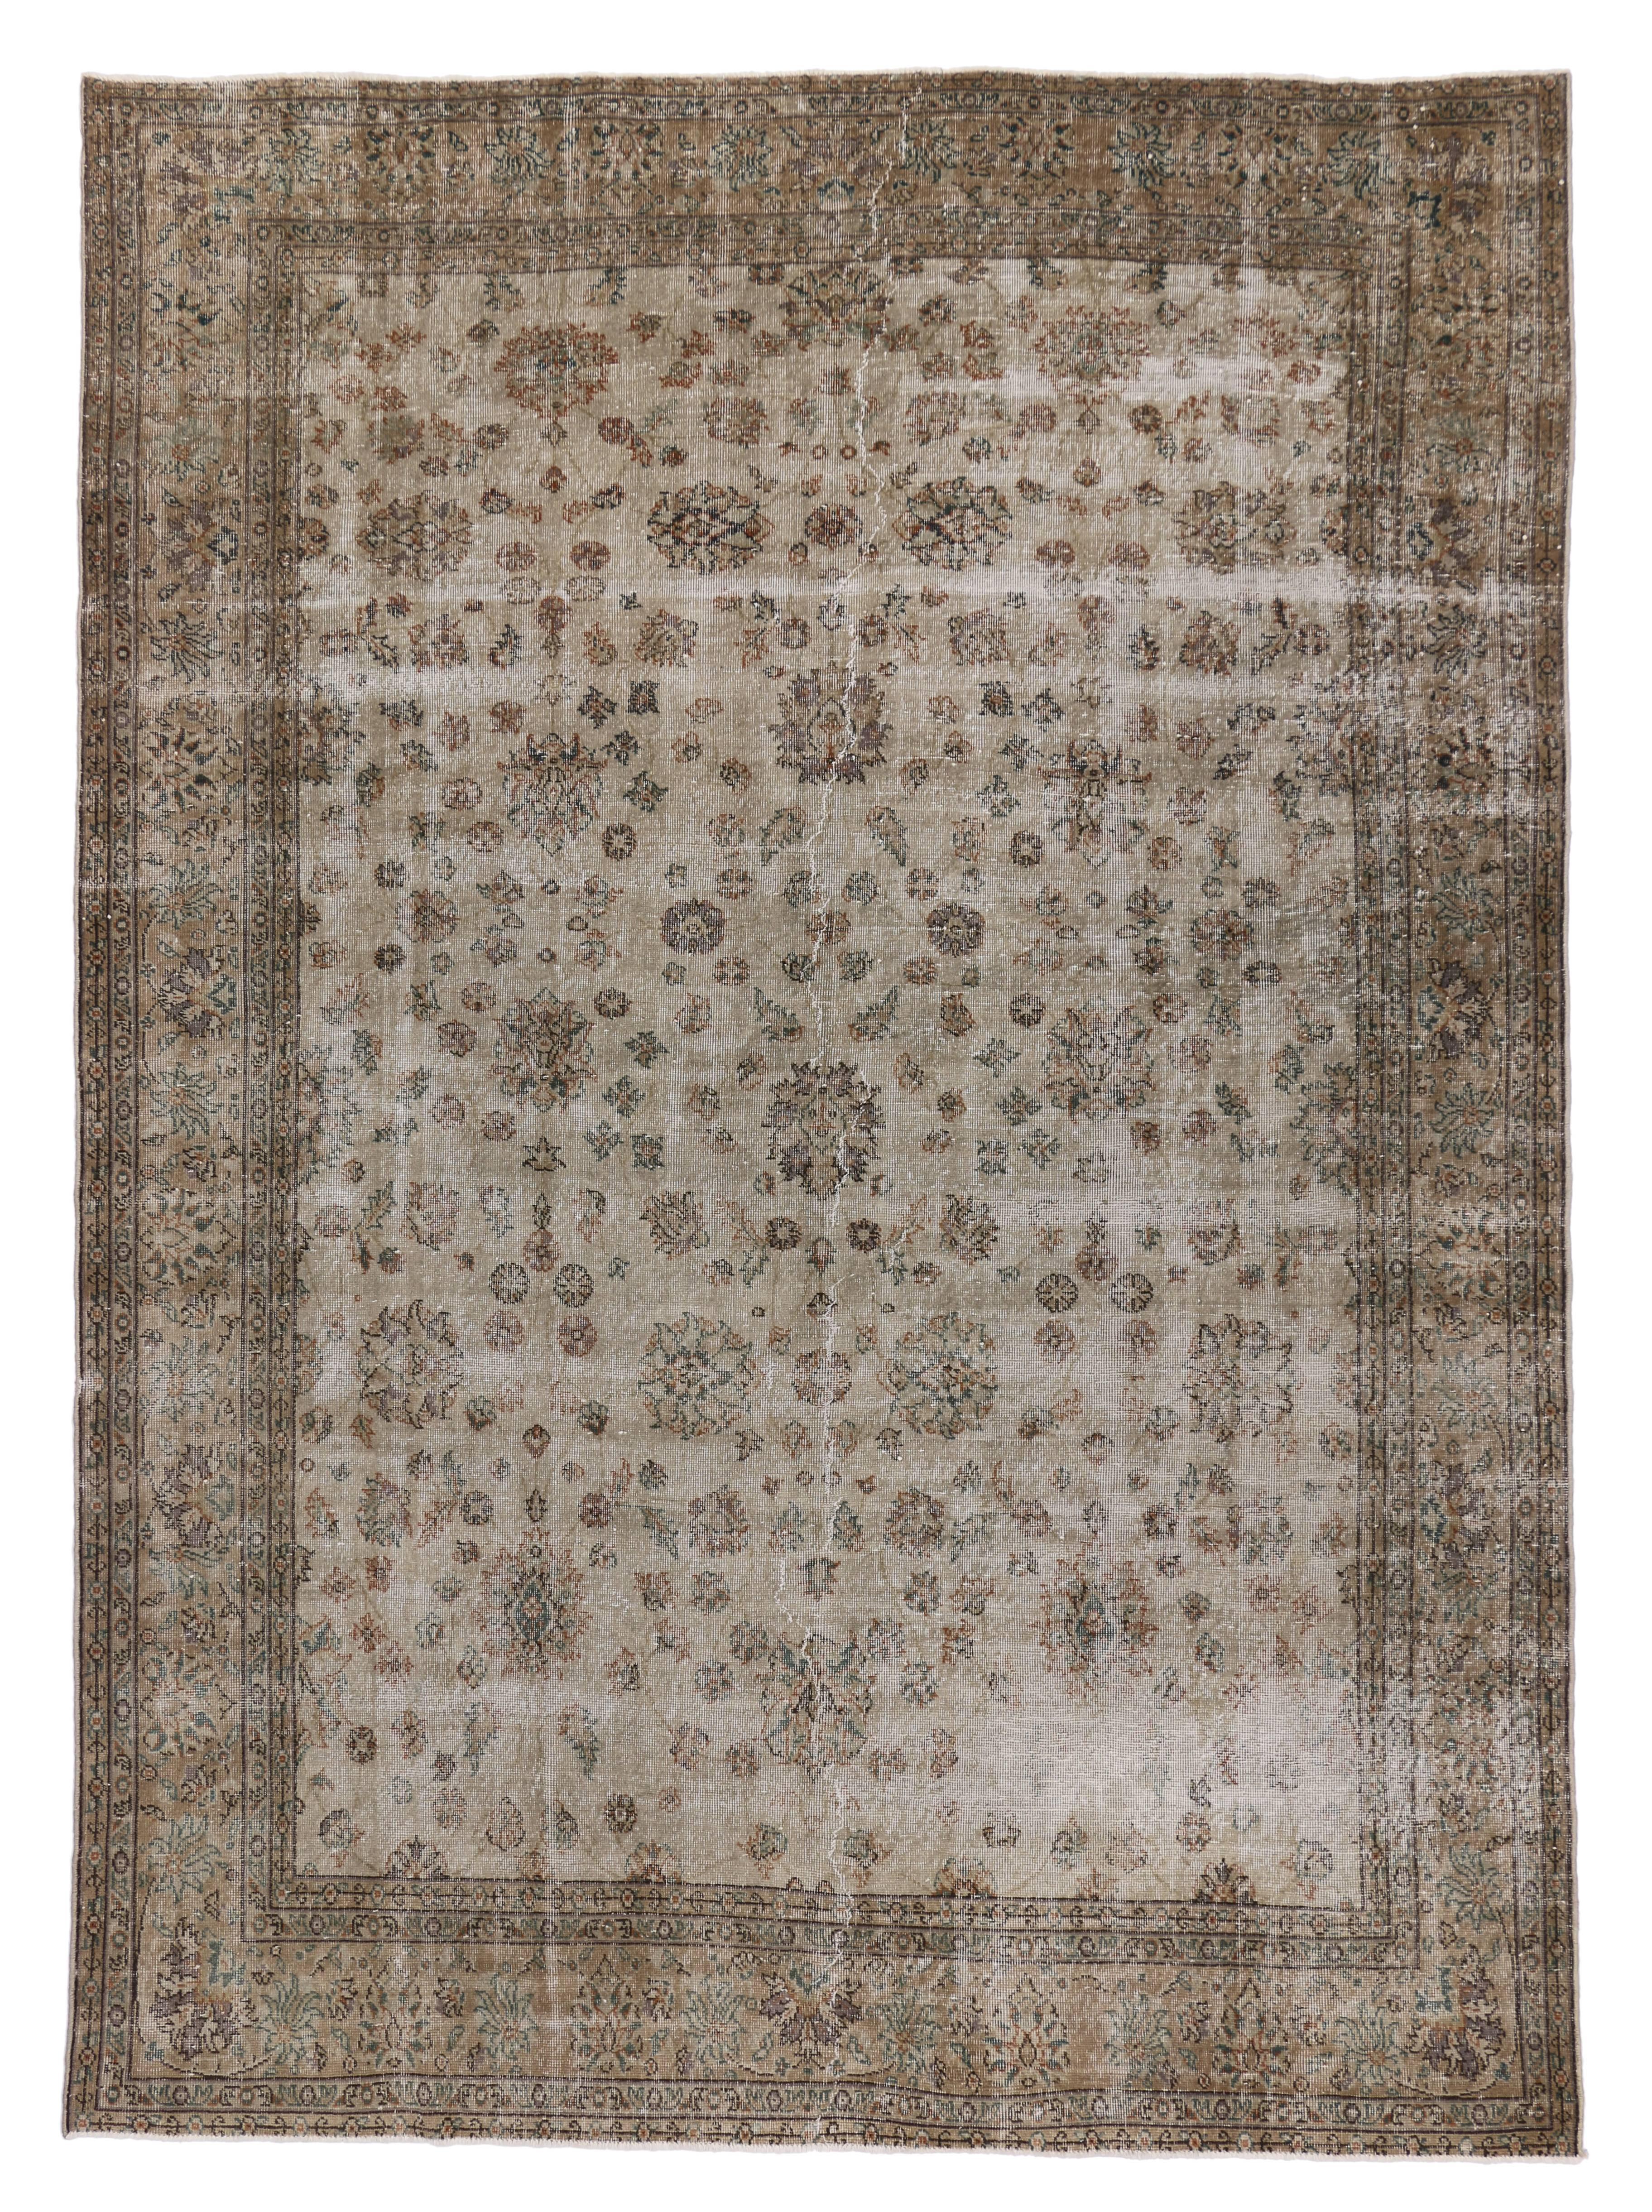 51093 distressed Sivas rug with shabby chic farmhouse style 08'04 x 11'07. With its cosy casual vibe, neutral color palette and rugged charm, this distressed vintage Sivas rug with shabby chic farmhouse style creates a warm and collected atmosphere.